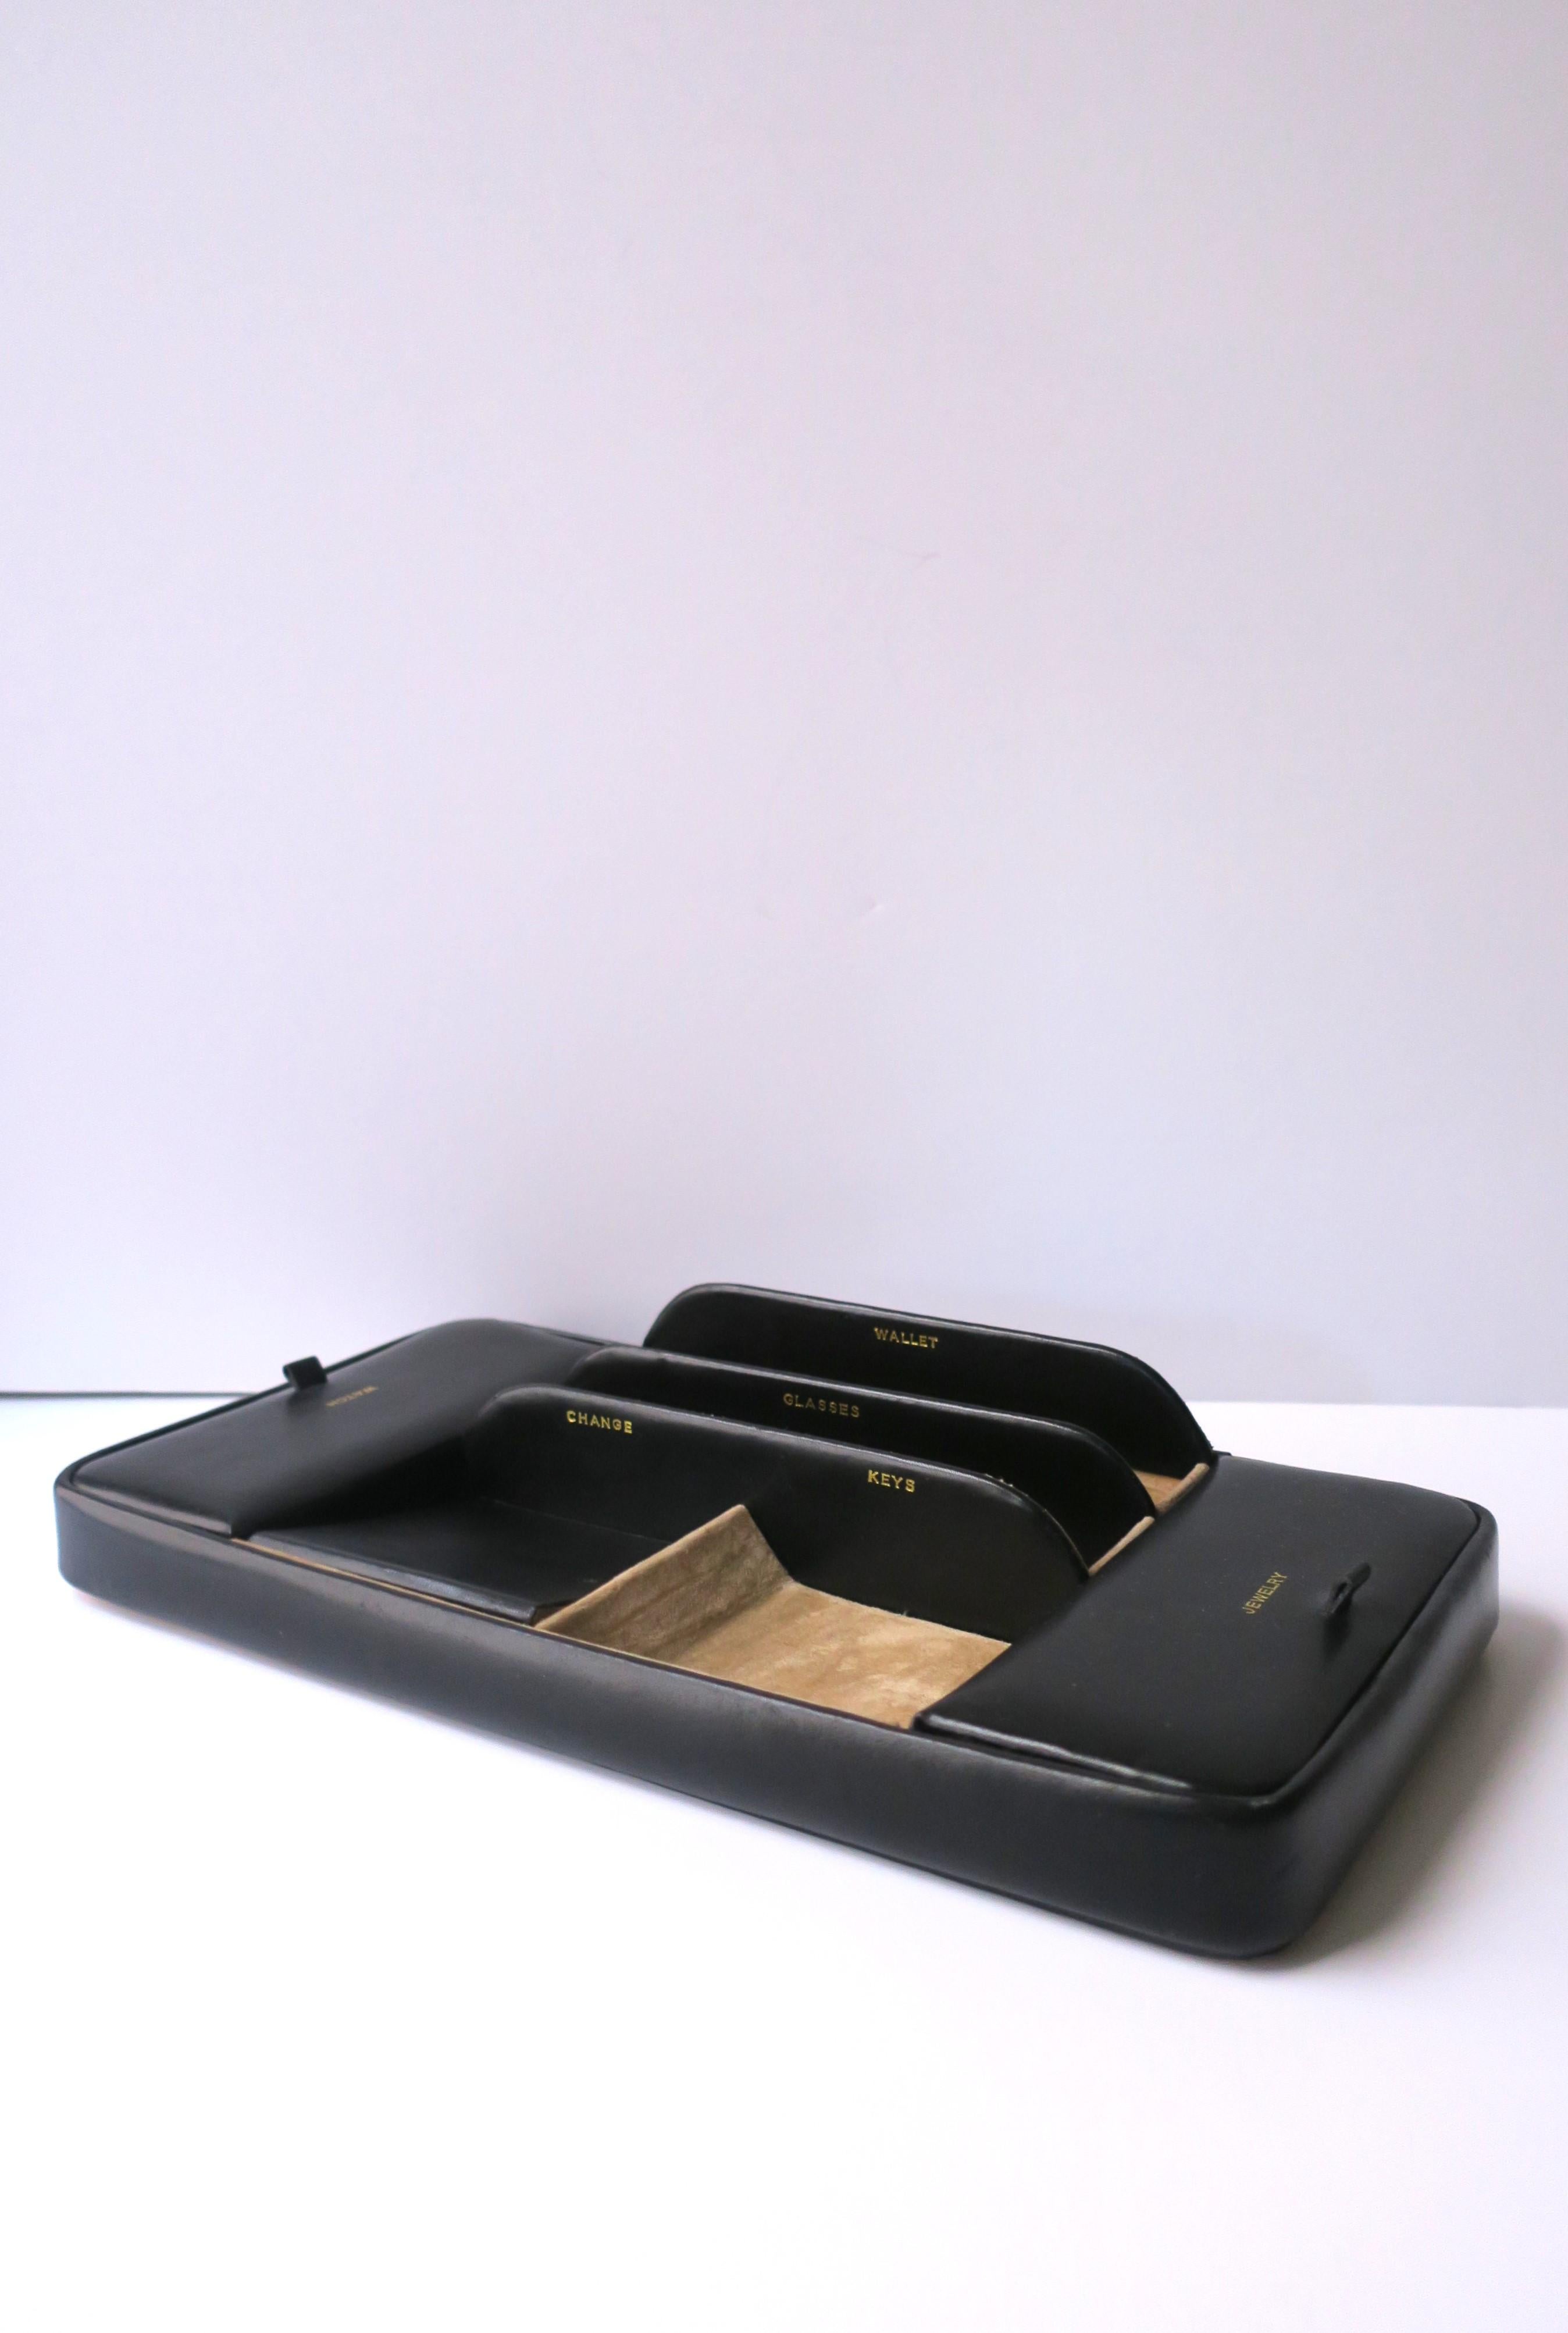 English Black Leather Desk Tray Caddy Box Organizer In Excellent Condition For Sale In New York, NY